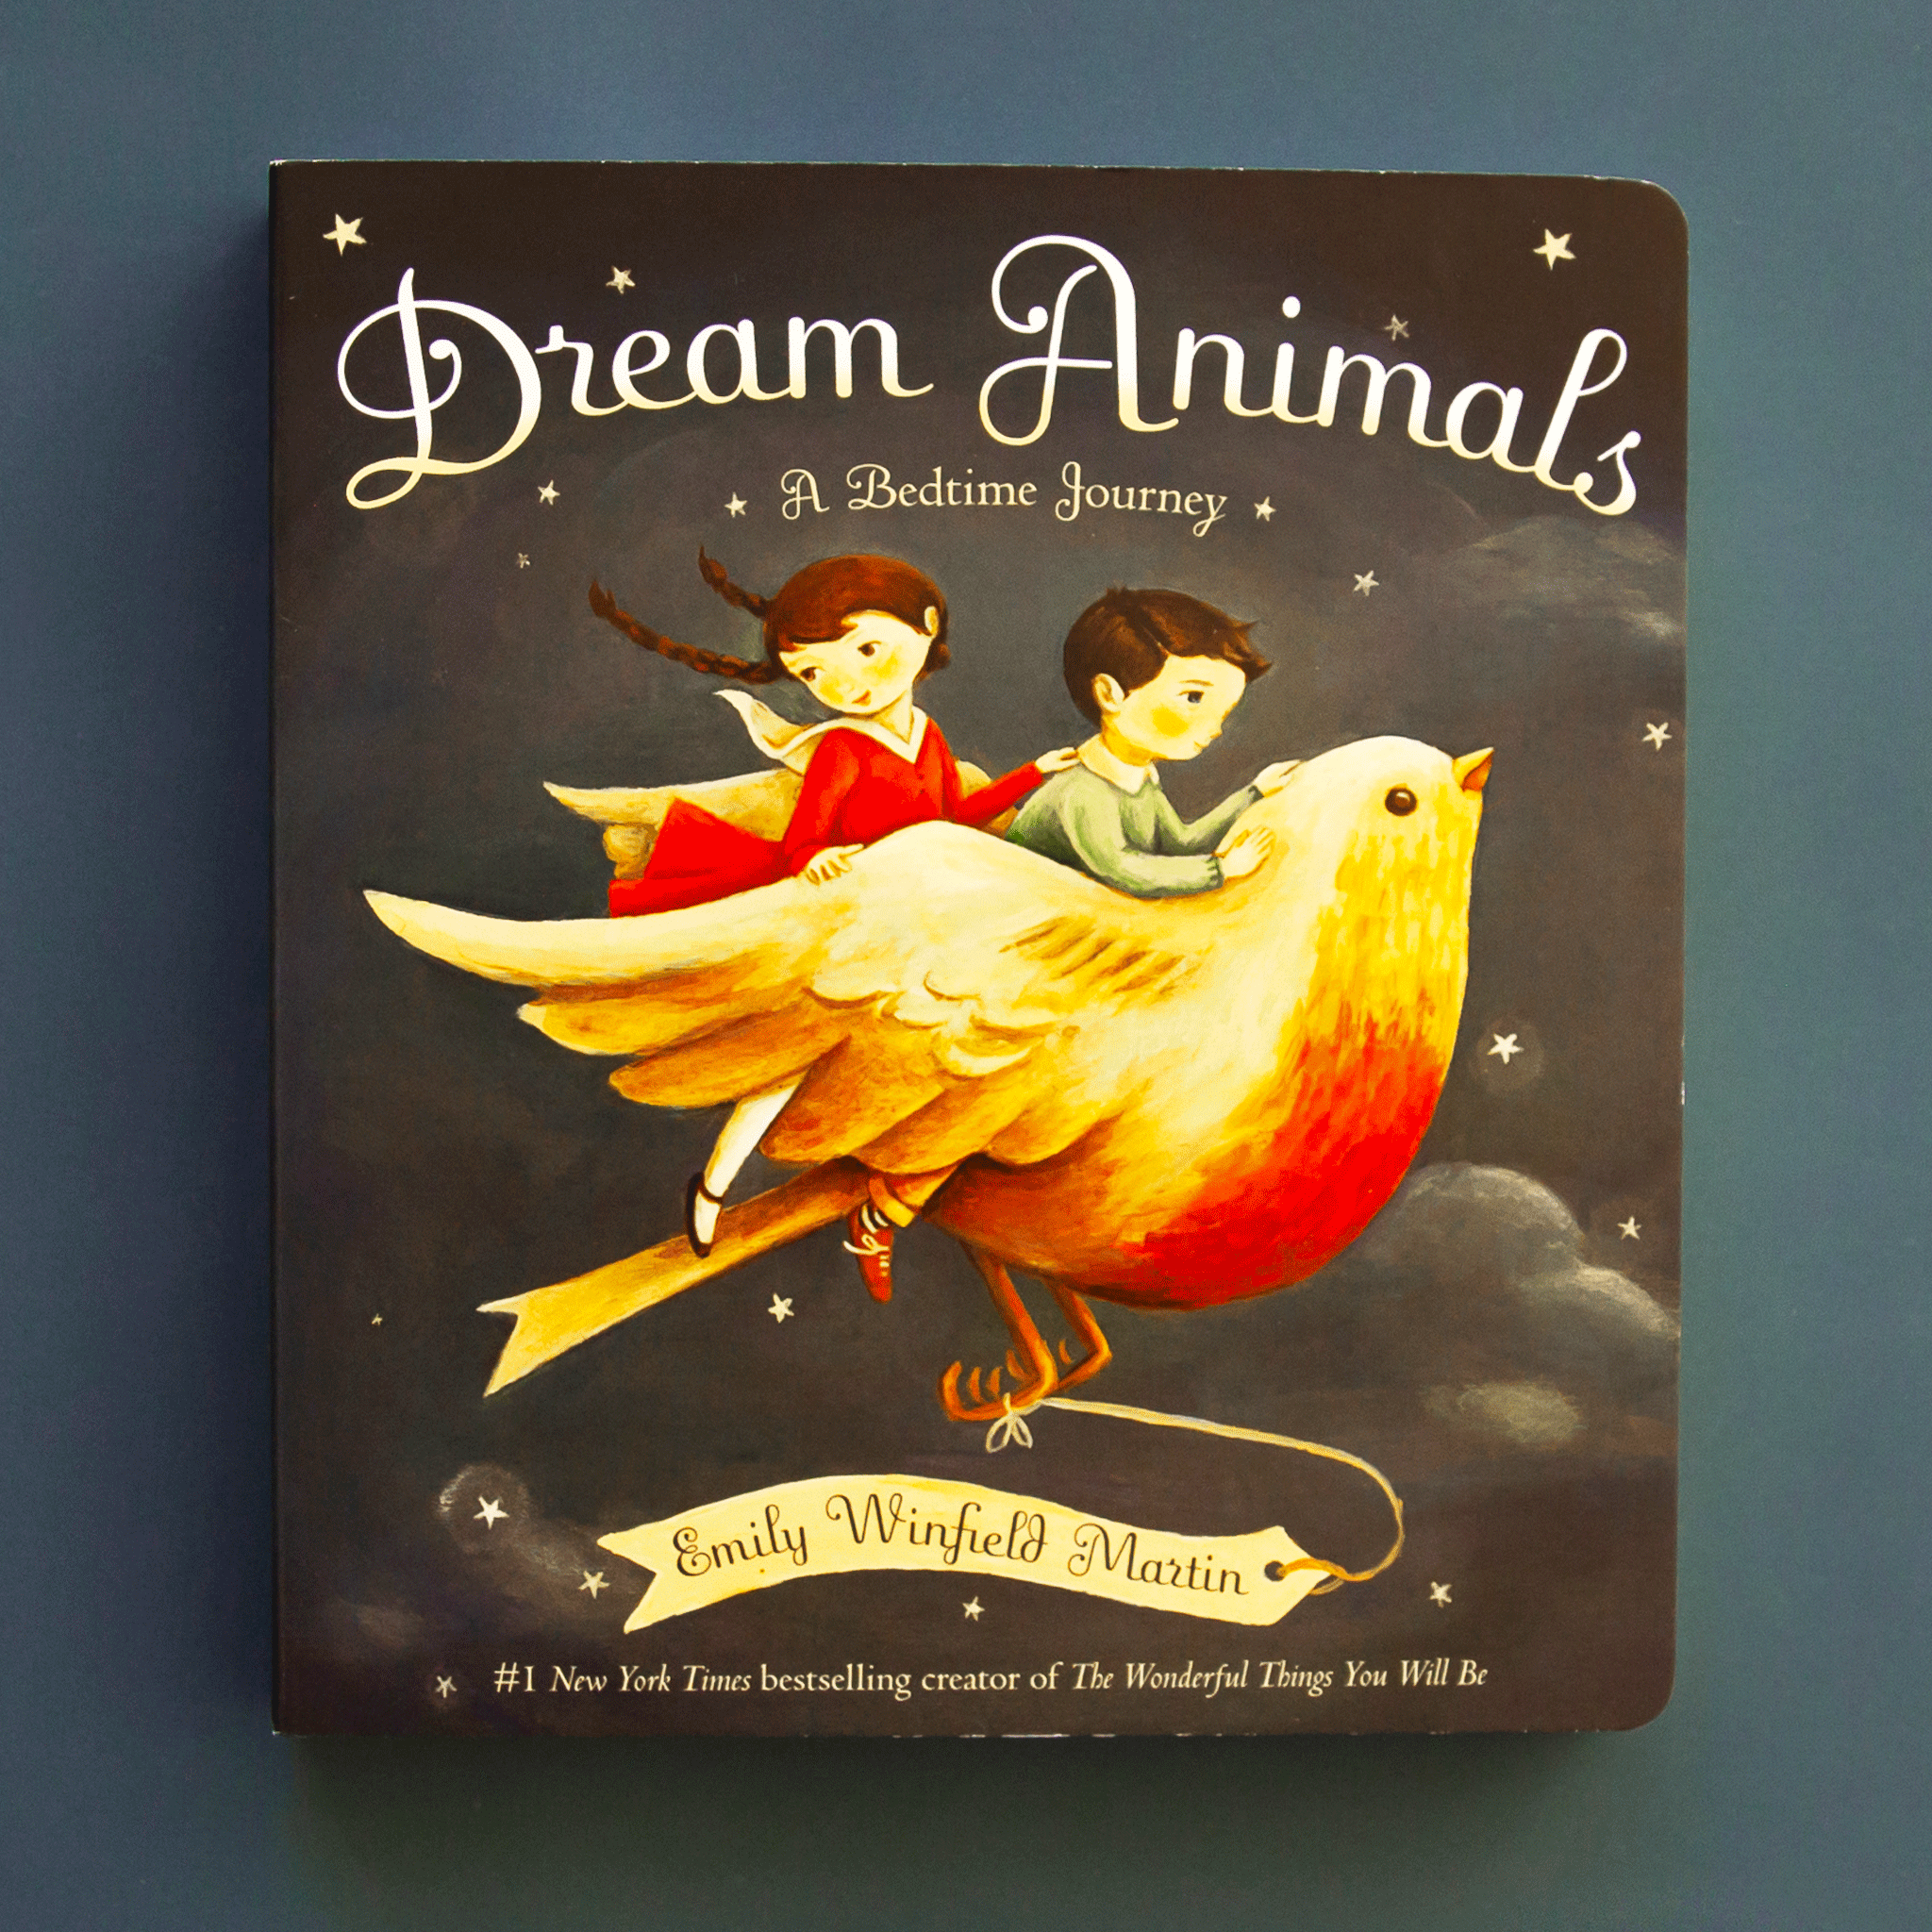 A dark blue/gray book cover with the title, &quot;Dream Animals: A Bedtime Journey&quot; along with an illustration of two children riding a bird through the night sky.